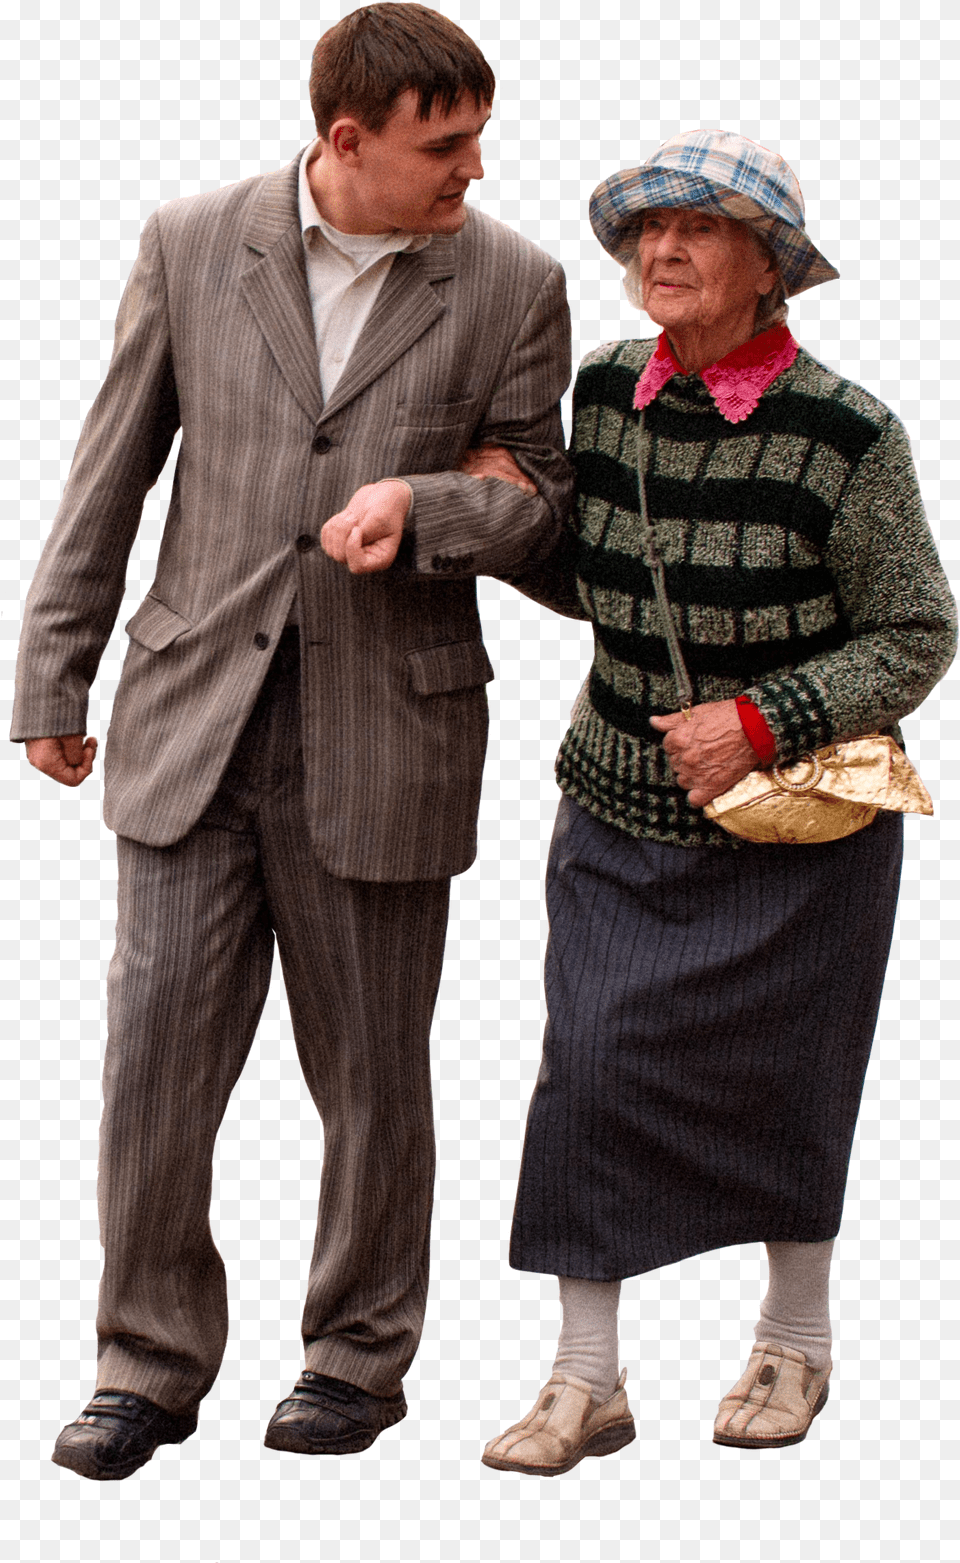 Easy Entourage U2014 Man In Suit Helping Old Lady Source Mikhail Old People Talking, Clothing, Coat, Person, Formal Wear Free Transparent Png